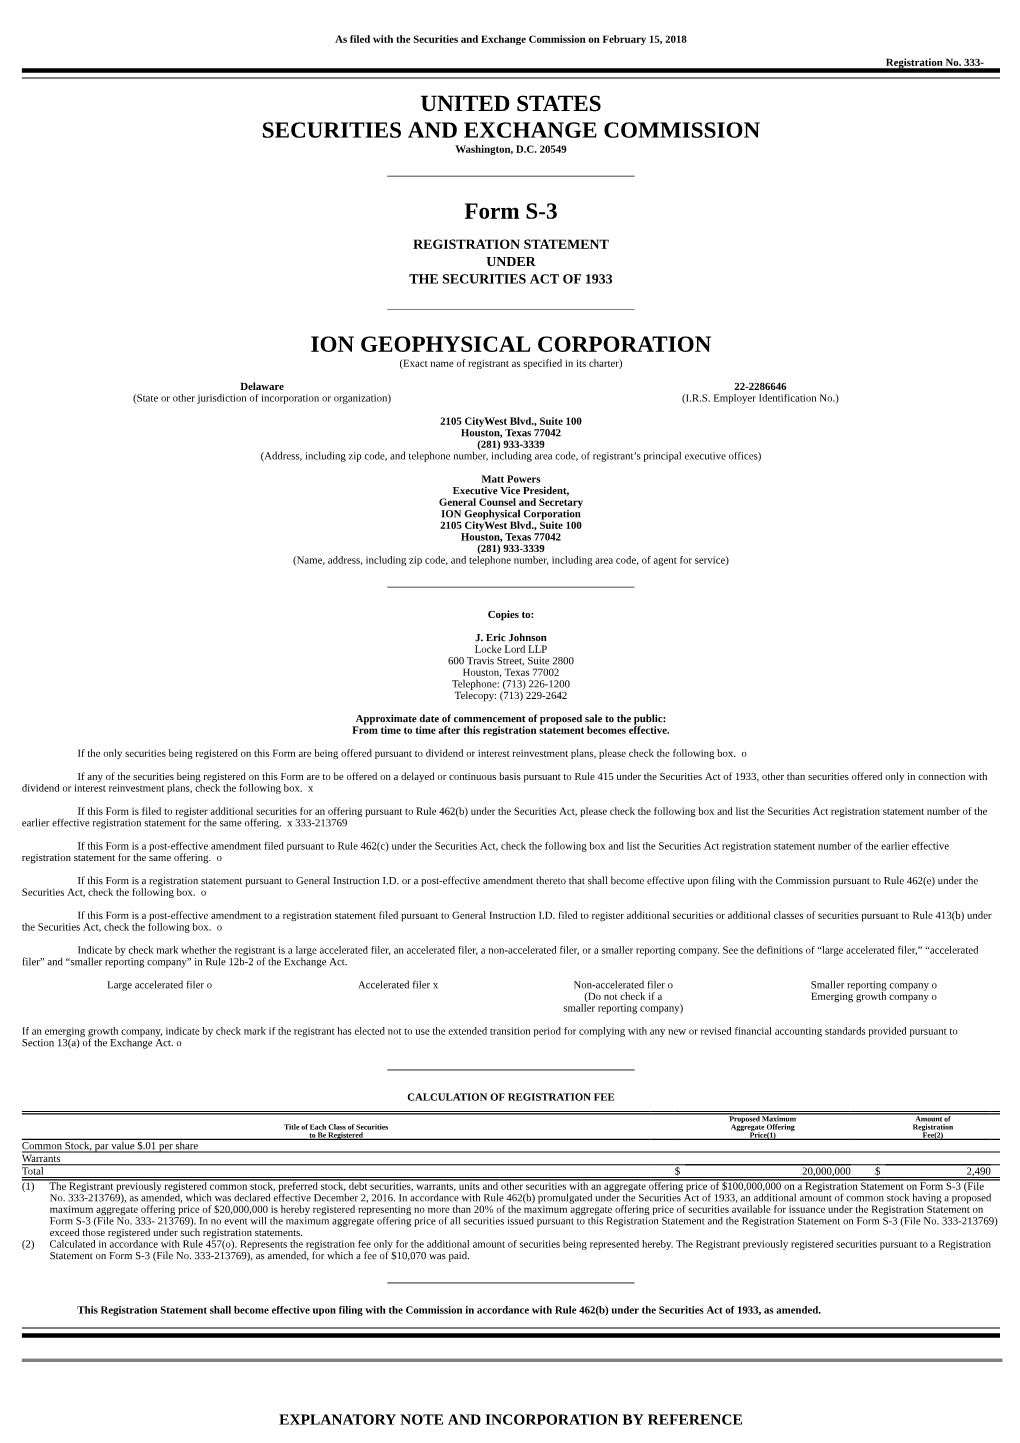 UNITED STATES SECURITIES and EXCHANGE COMMISSION Form S-3 ION GEOPHYSICAL CORPORATION